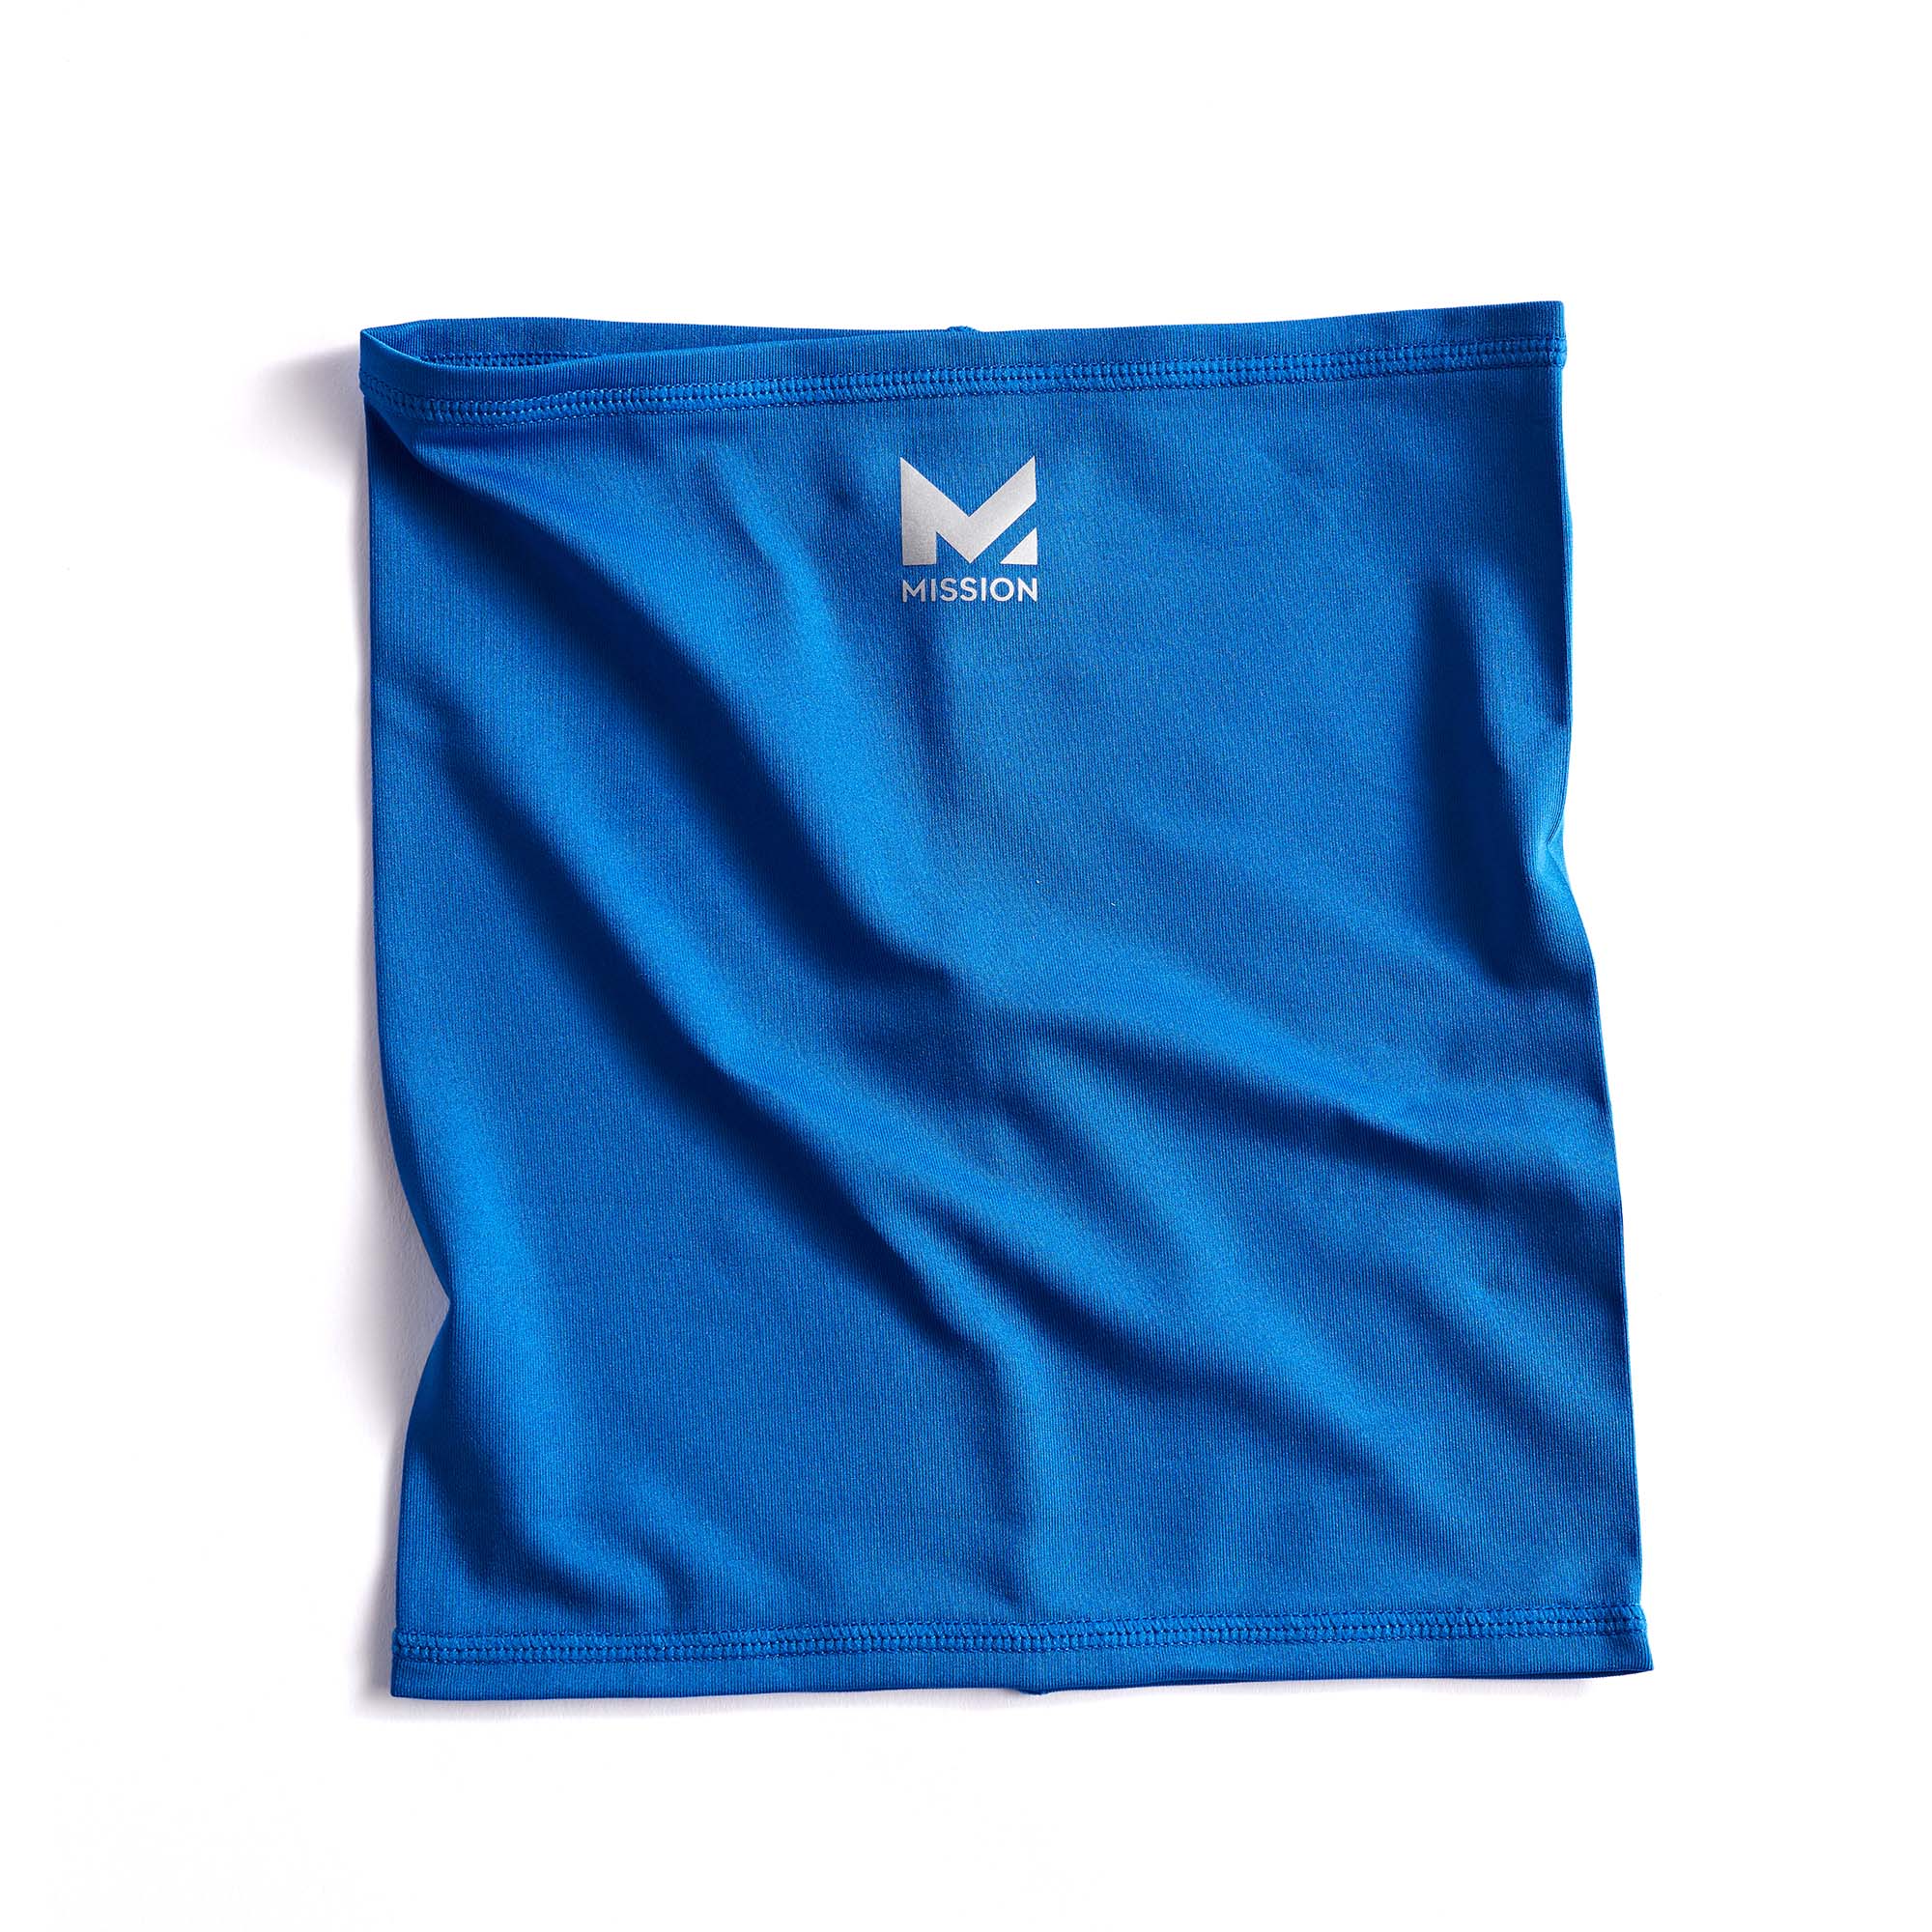 Cooling Compact 6-in-1 Neck Gaiter Neck Gaiters MISSION One Size Mission Blue 